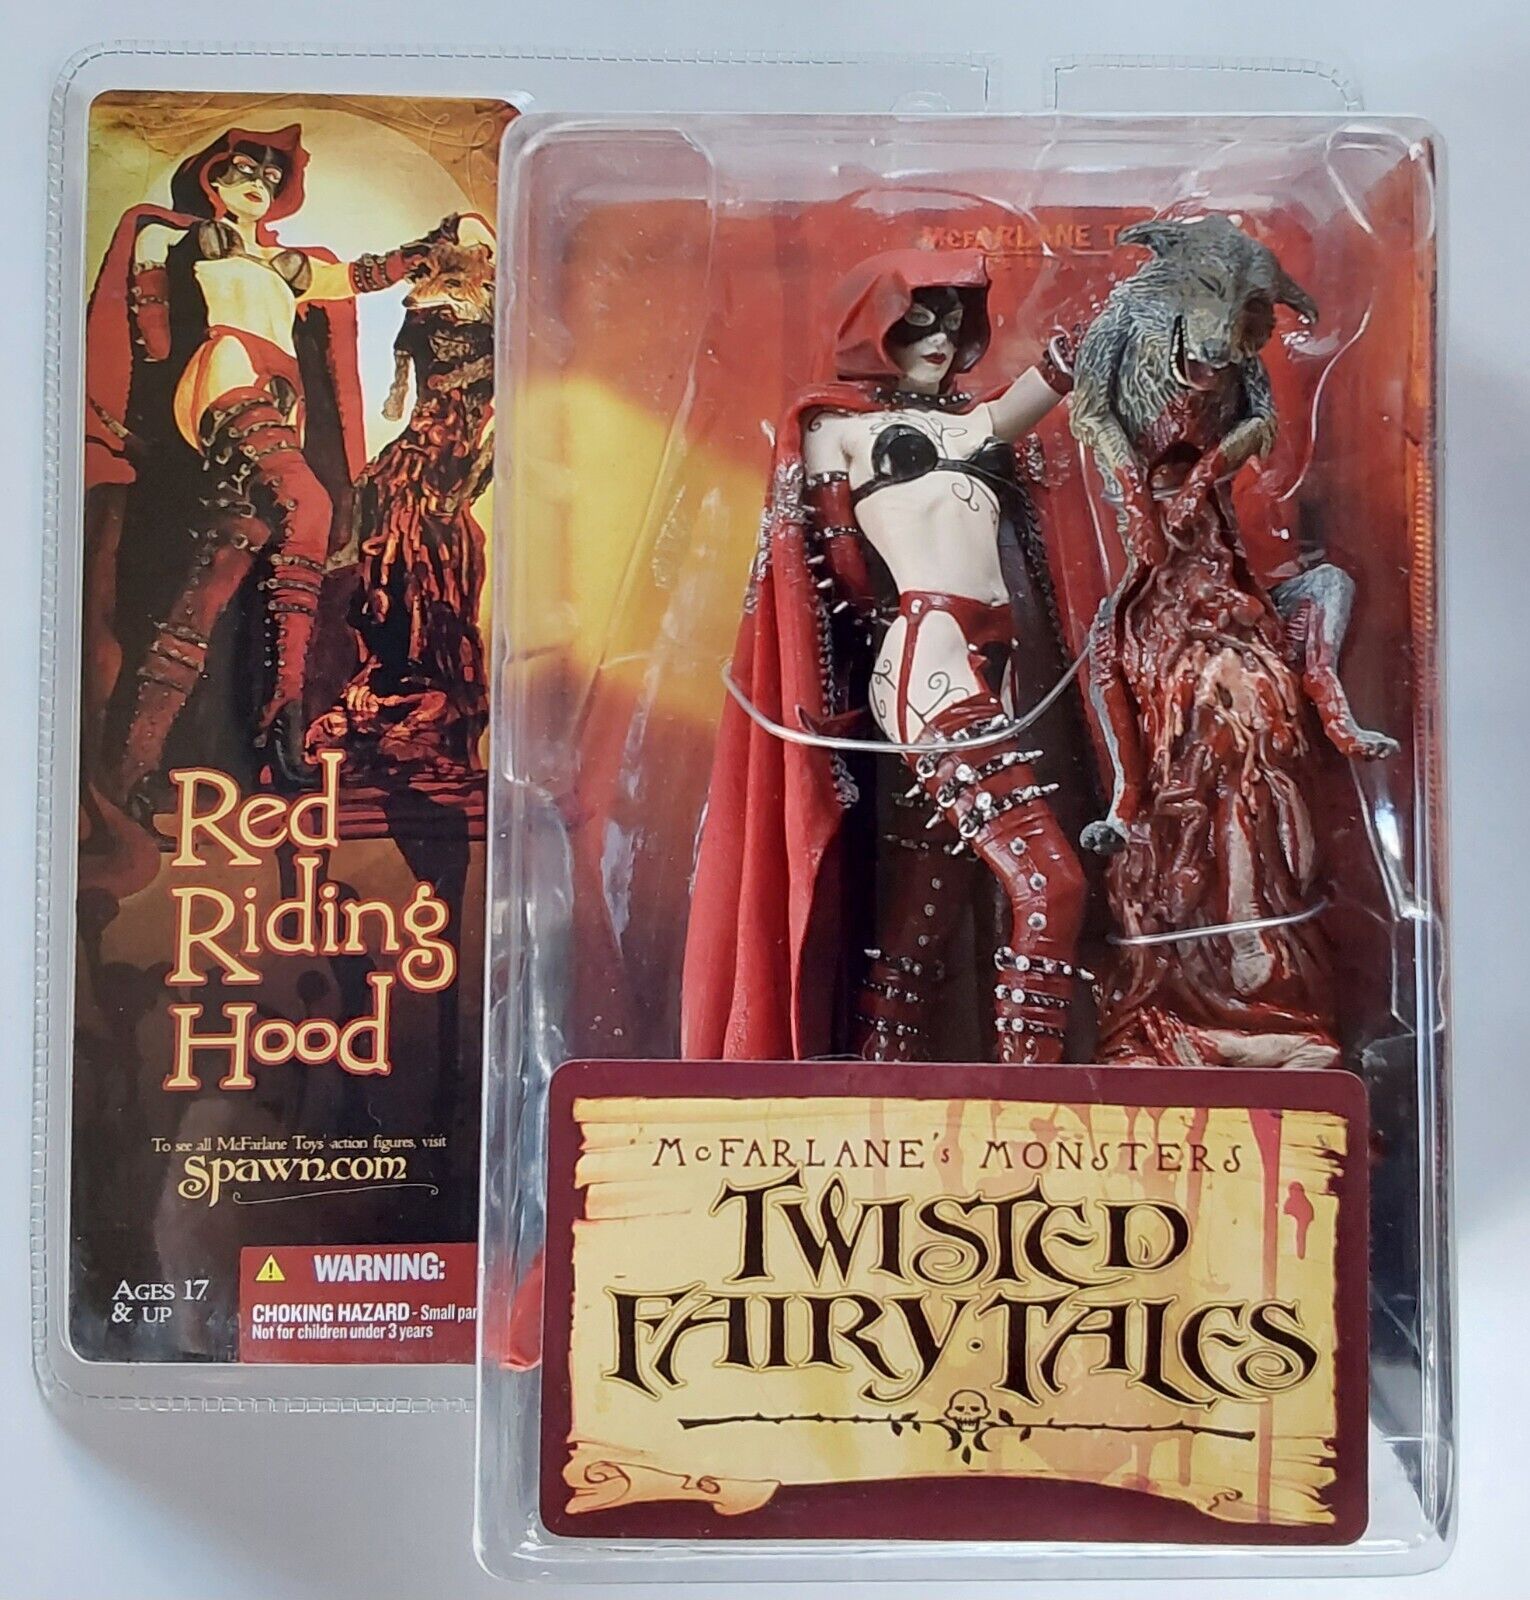 McFarlane Monsters series 4 Red Riding Hood action figure